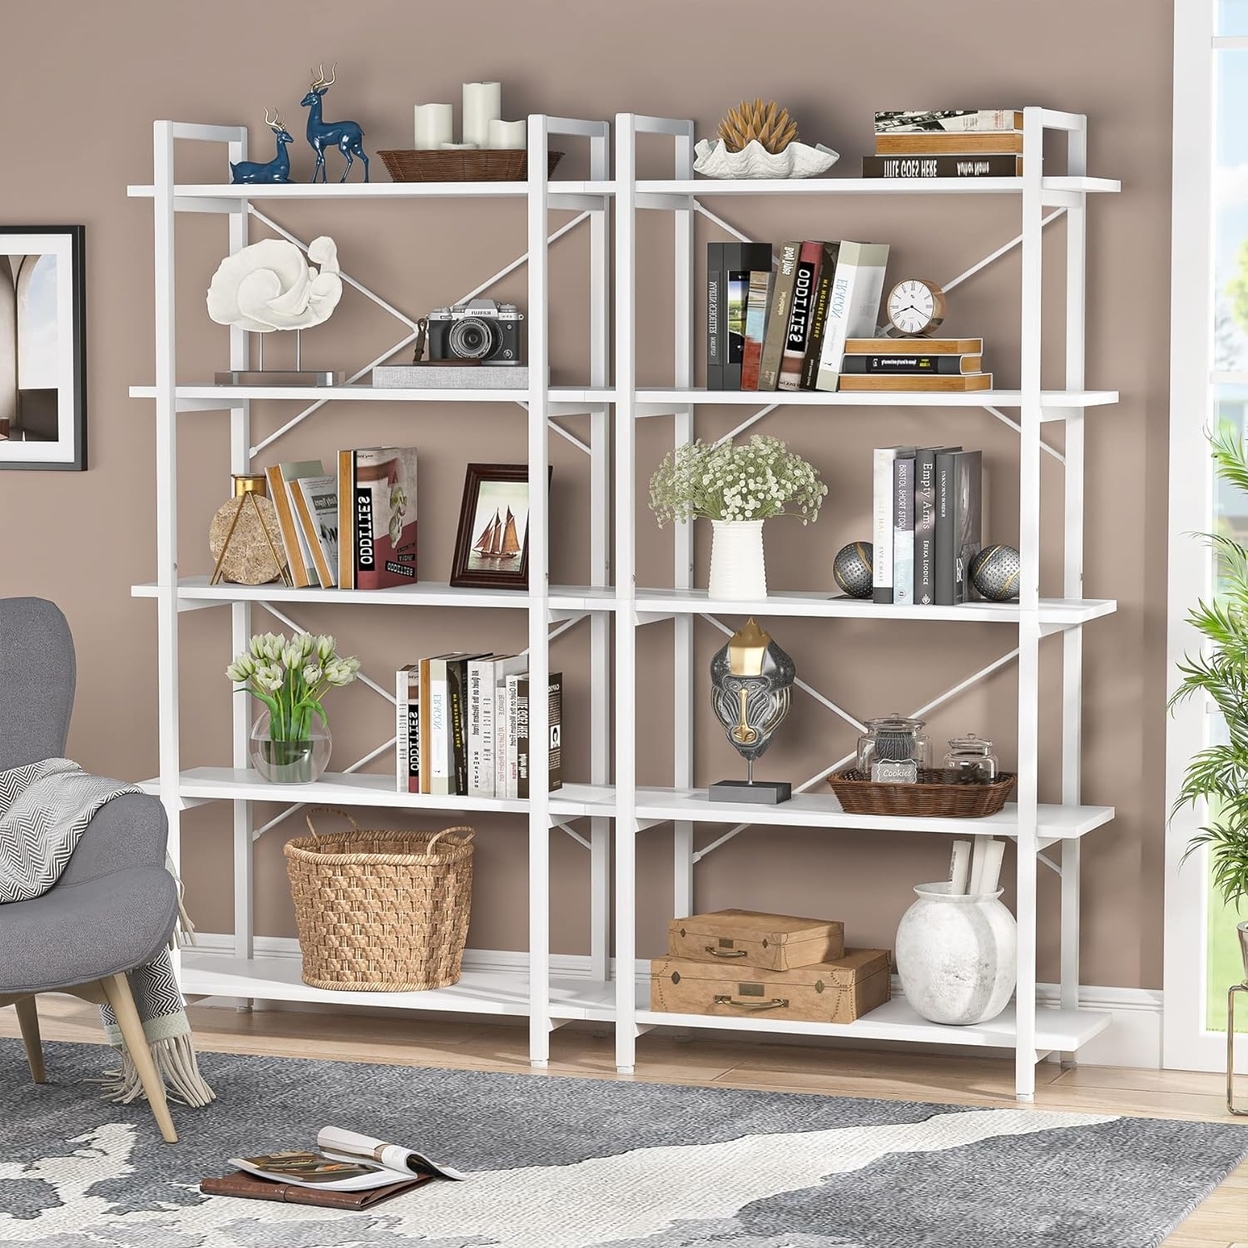 Tribesigns 5 Tier White Bookshelf, Modern Etagere Bookcase With Metal Frame, Tall Book Shelf Unit - 1pc